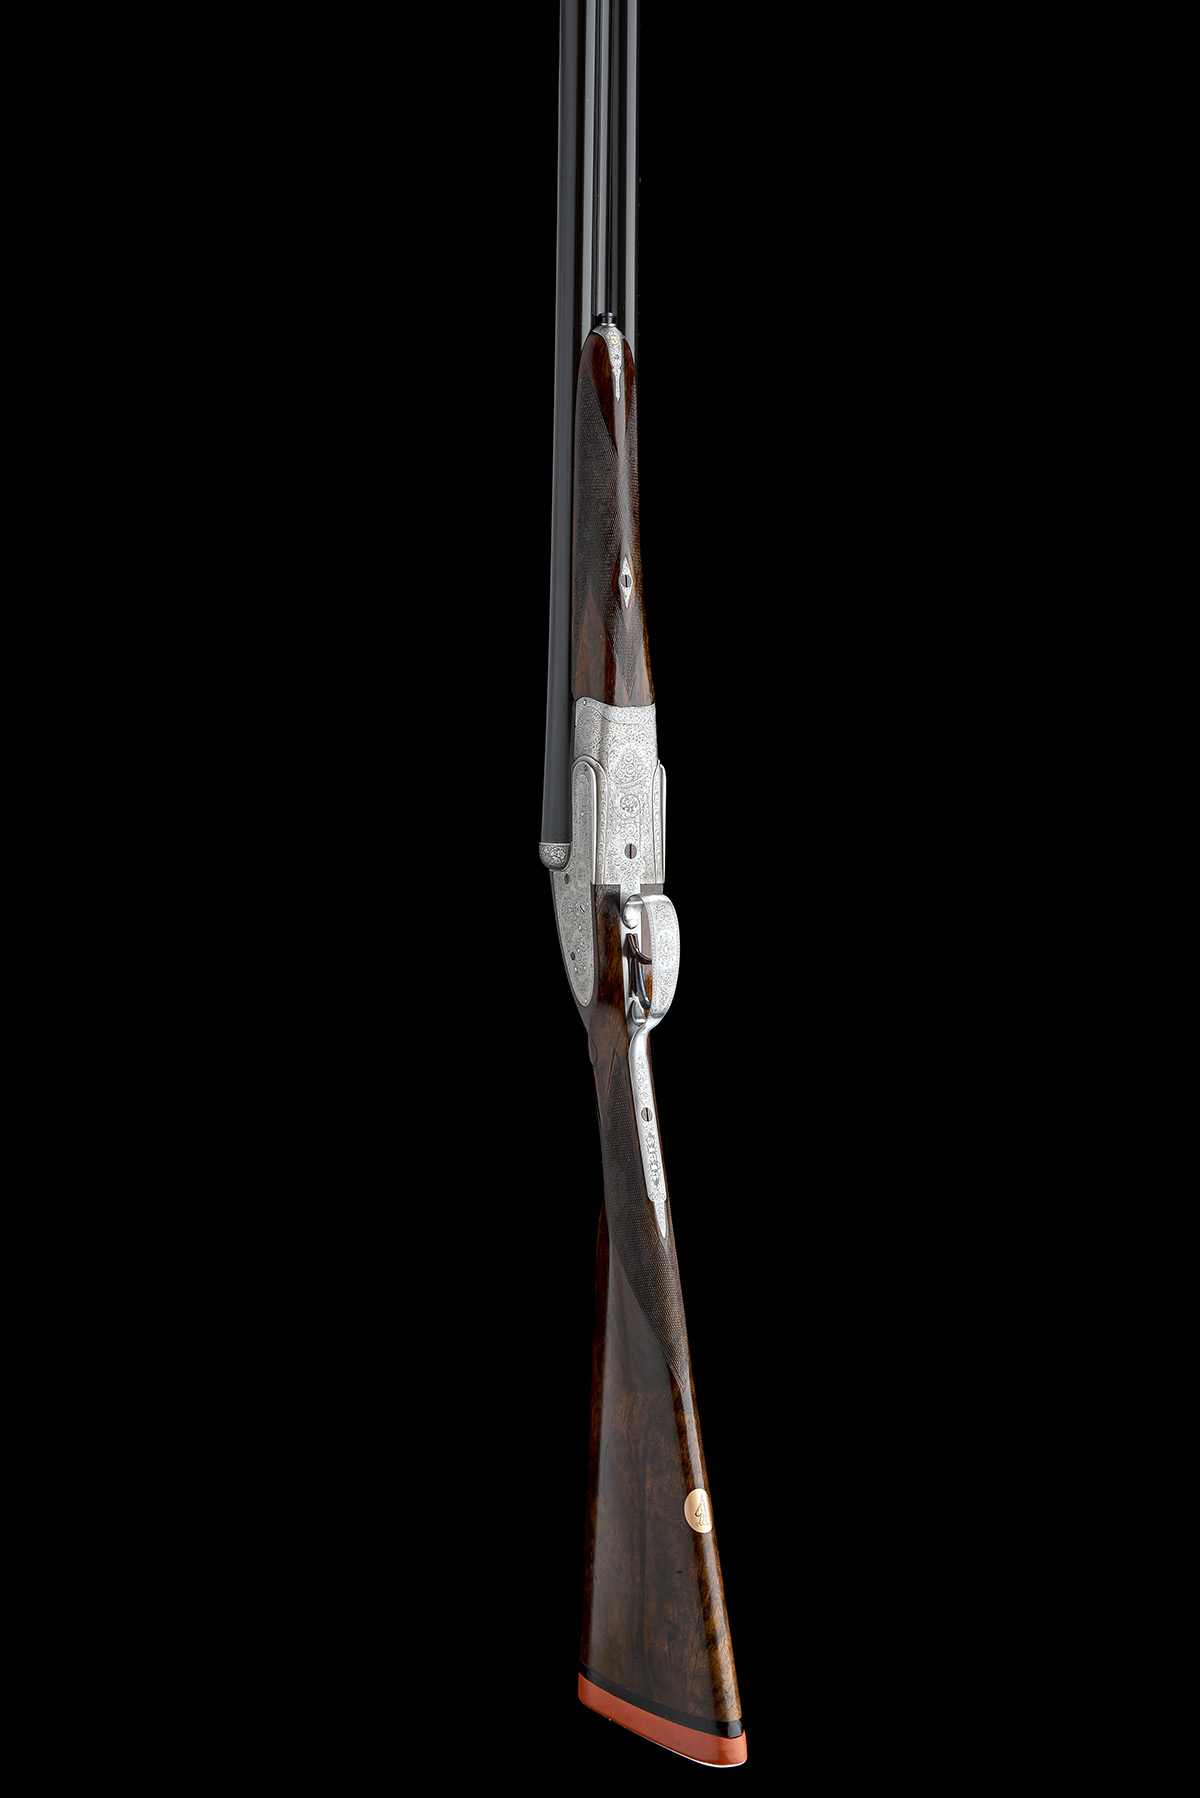 COGSWELL & HARRISON A 12-BORE 'EXTRA QUALITY VICTOR EJECTOR' SIDELOCK EJECTOR, serial no. 54343, - Image 8 of 9